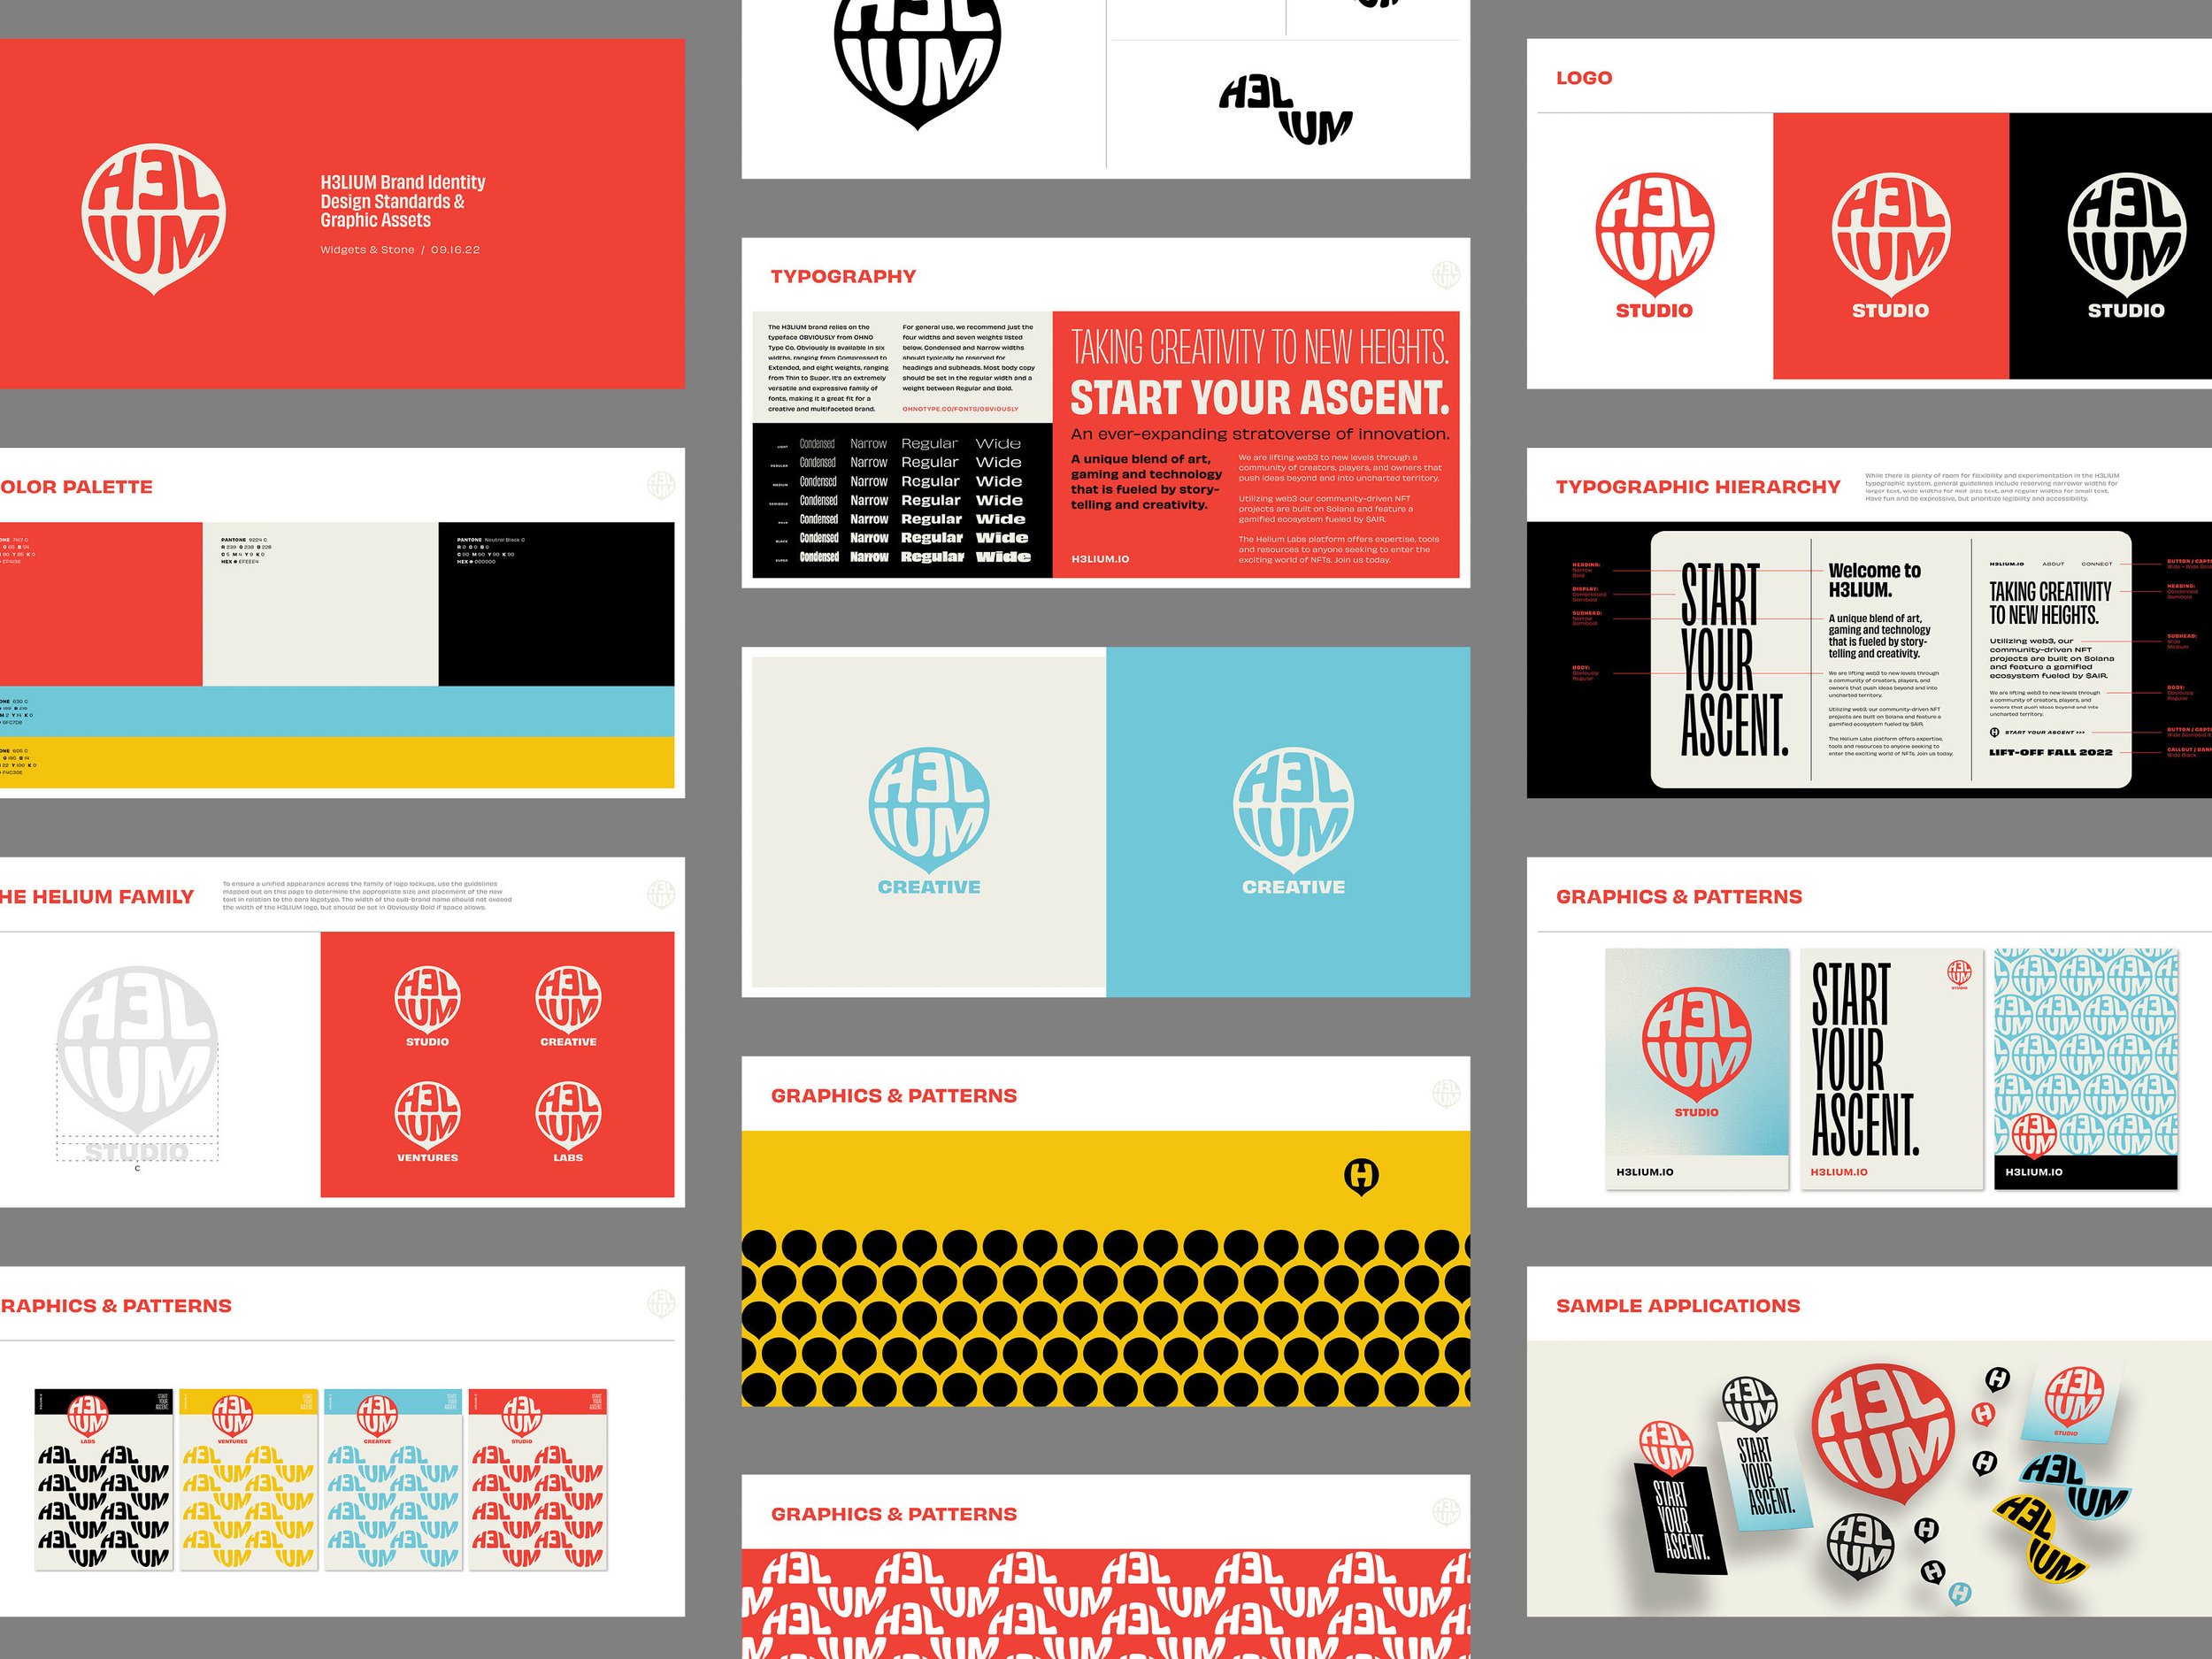 widgets & stone  Graphic Design and Branding Agency in